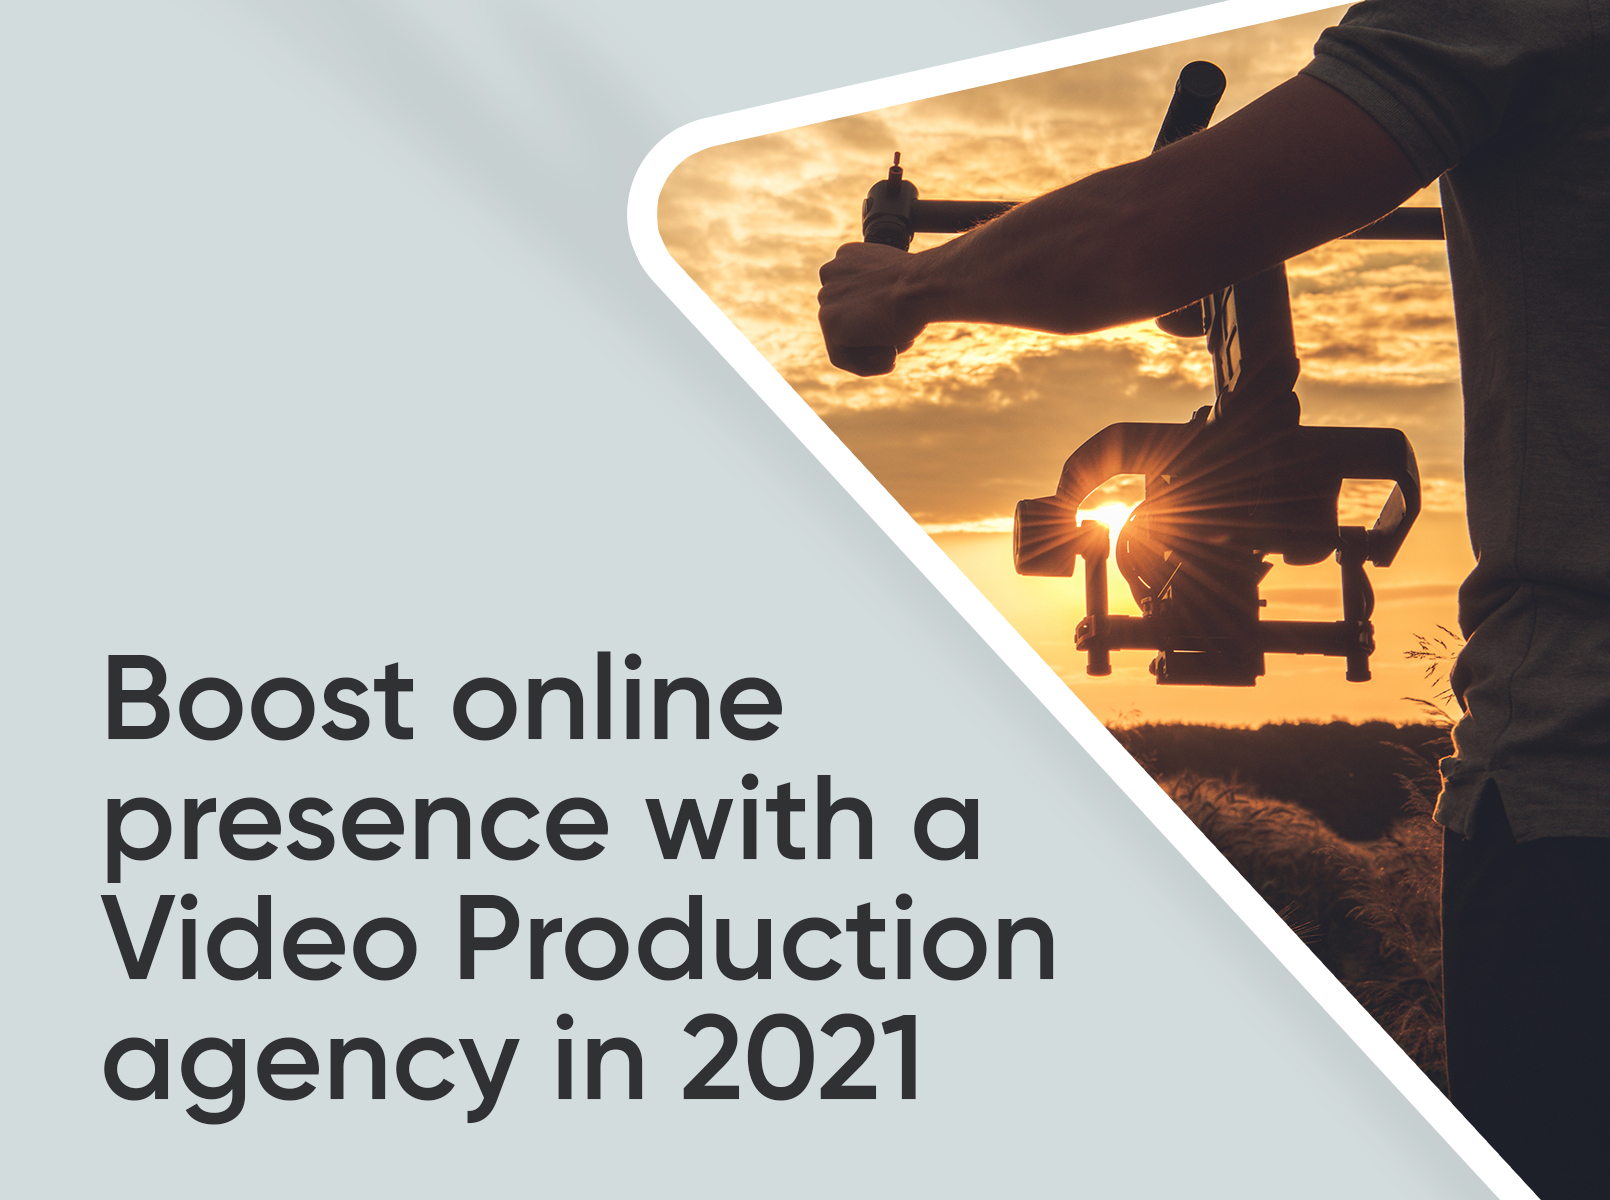 How can a Video Production agency help my business’s online presence in 2021?